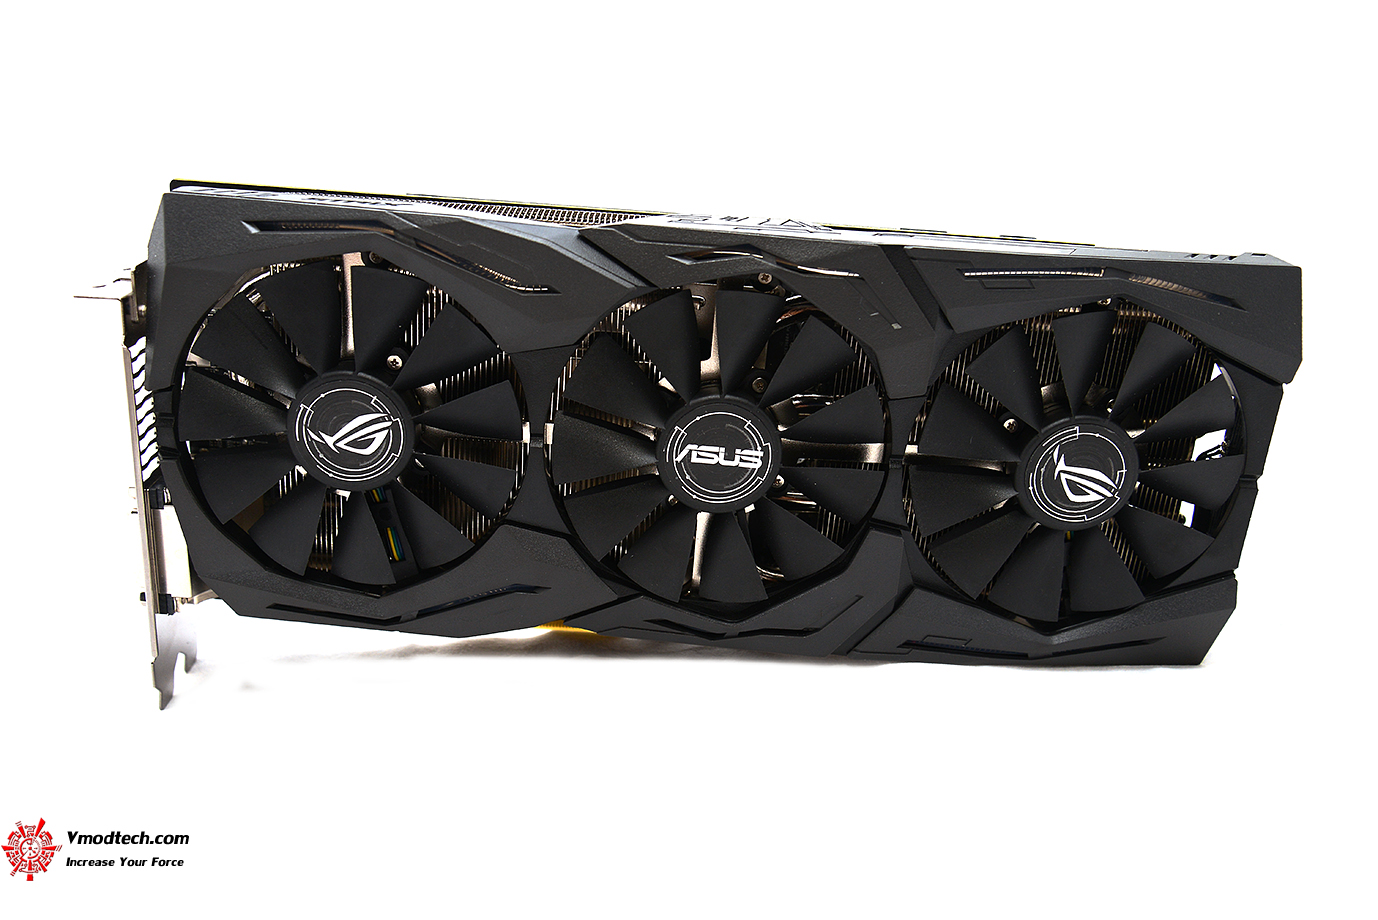 dsc 2348 ASUS ROG STRIX RX480 8G GAMING REVIEW